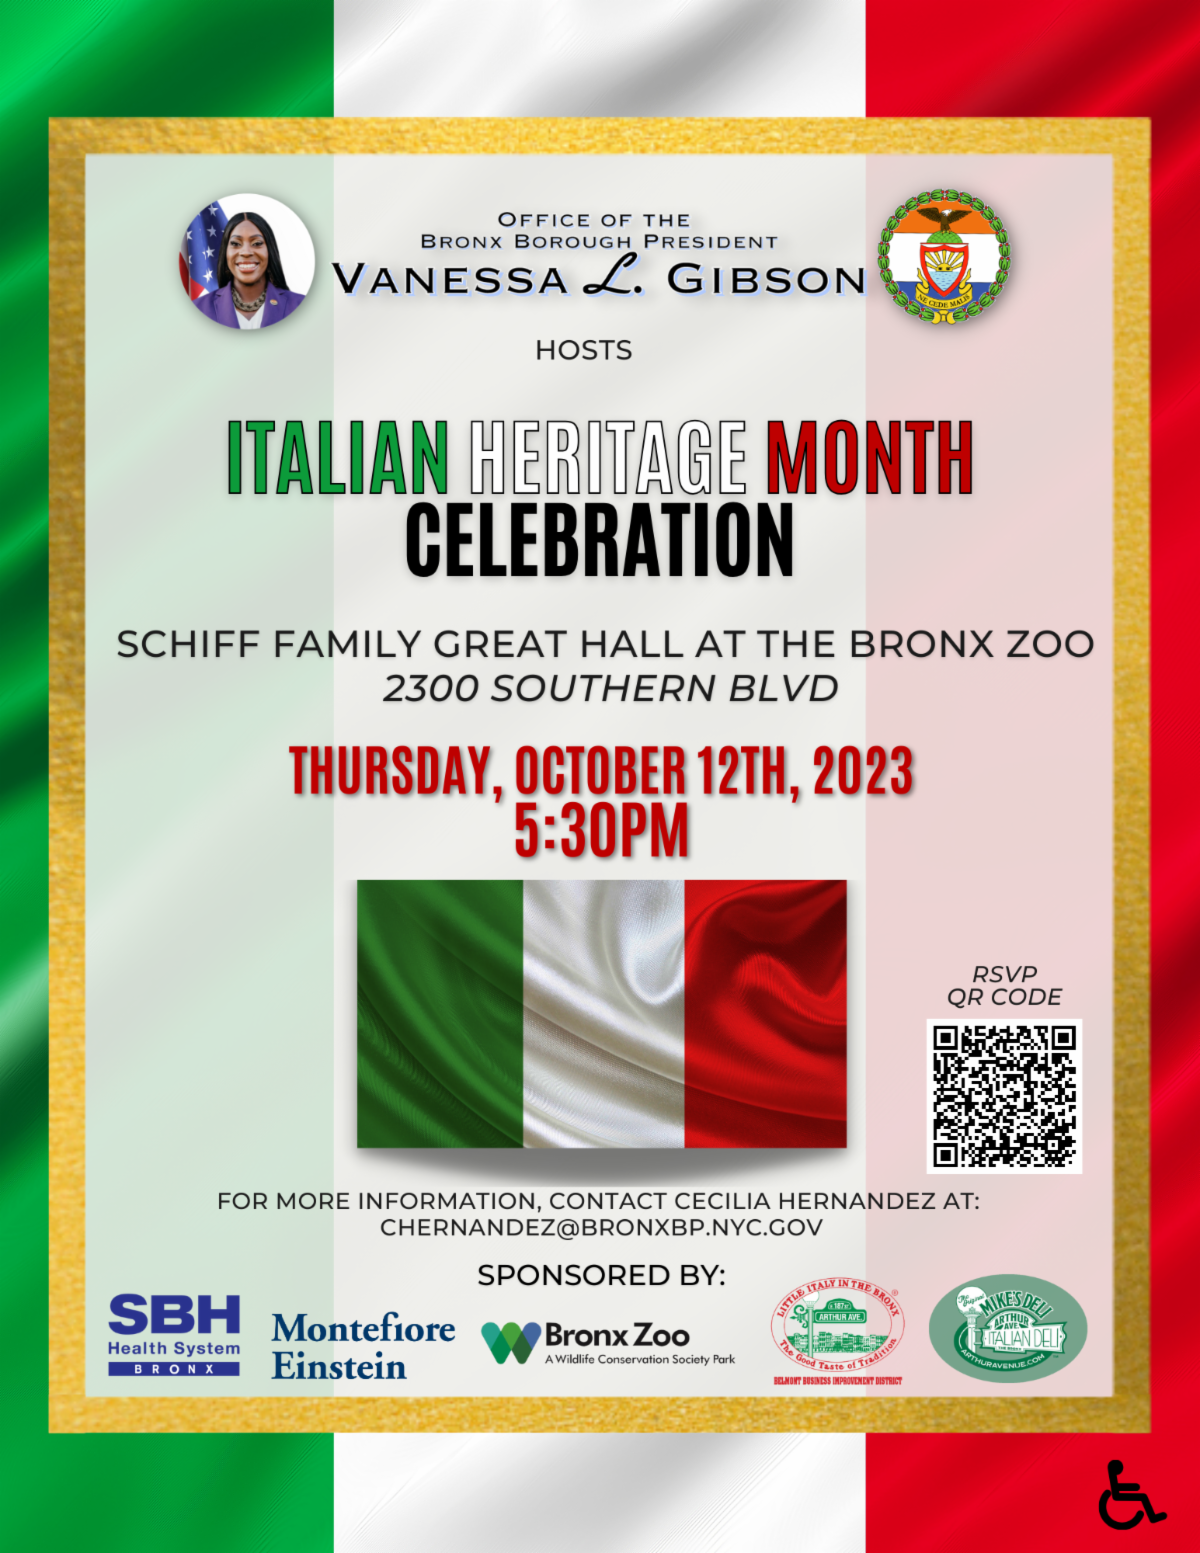 A flyer for the 2023 Italian Heritage Month event on October 12